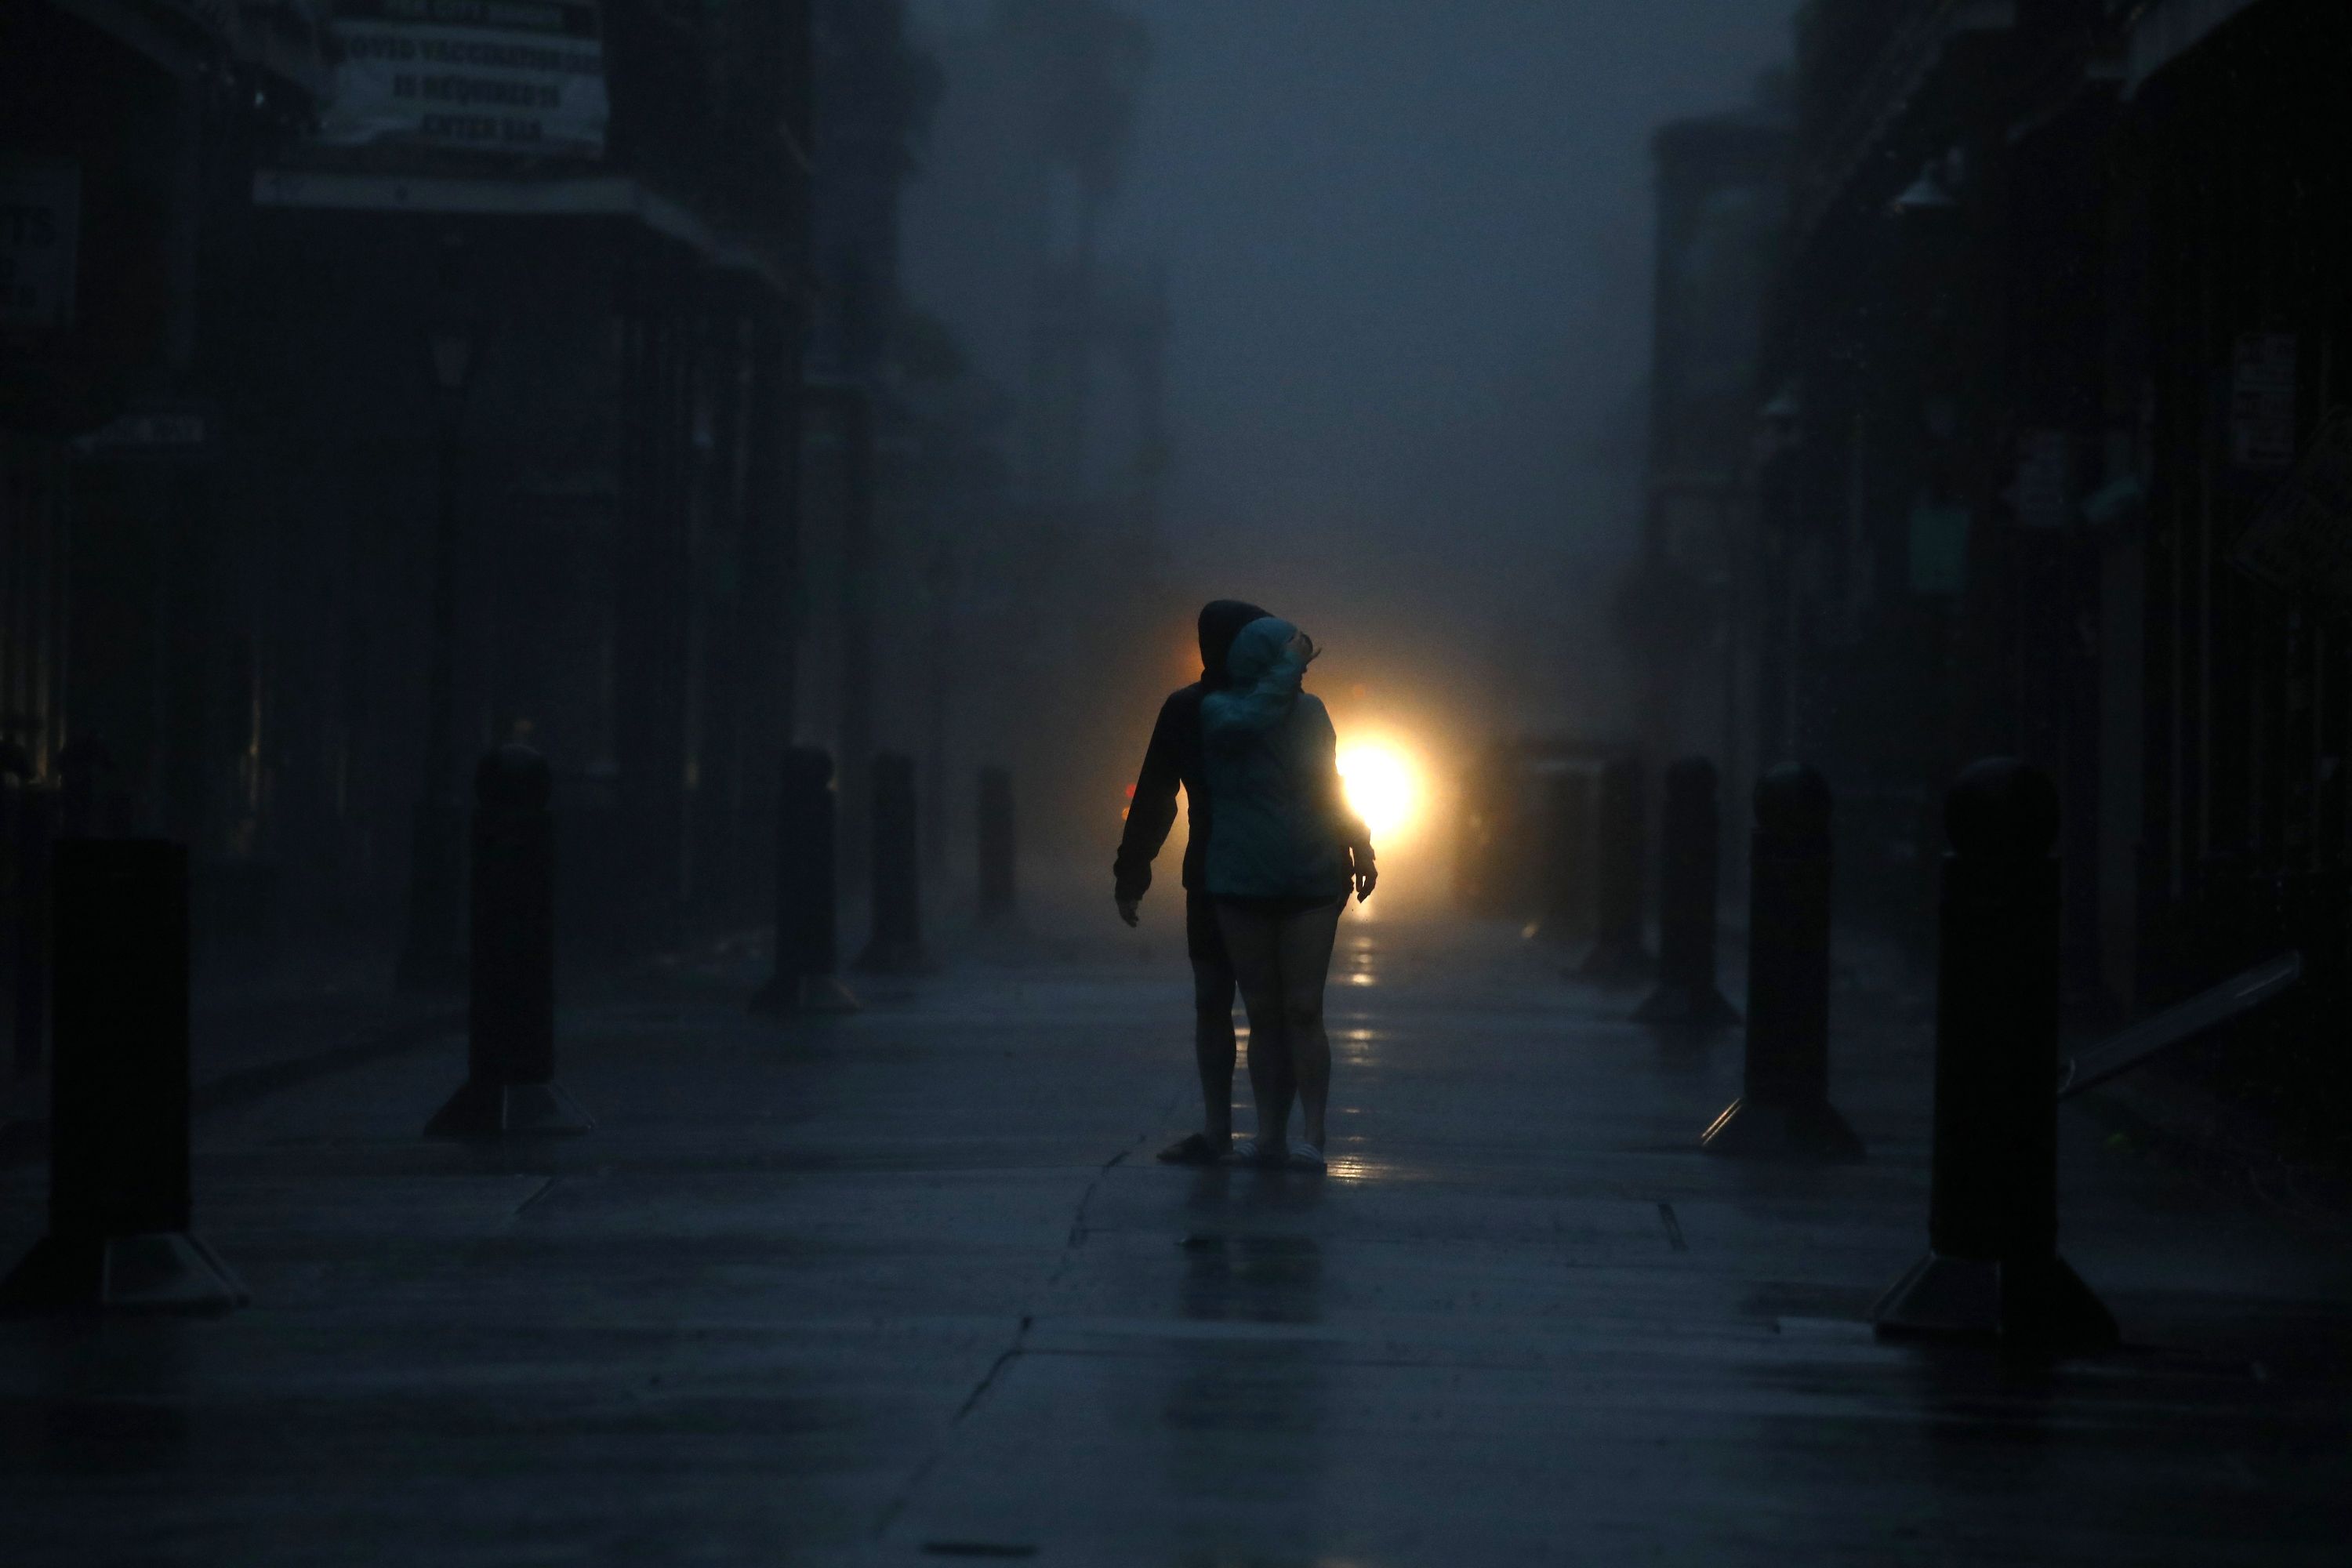 Pedestrians on Bourbon Street during a city-wide power outage caused by Hurricane Ida in New Orleans, Louisiana, U.S., on Sunday, Aug. 29